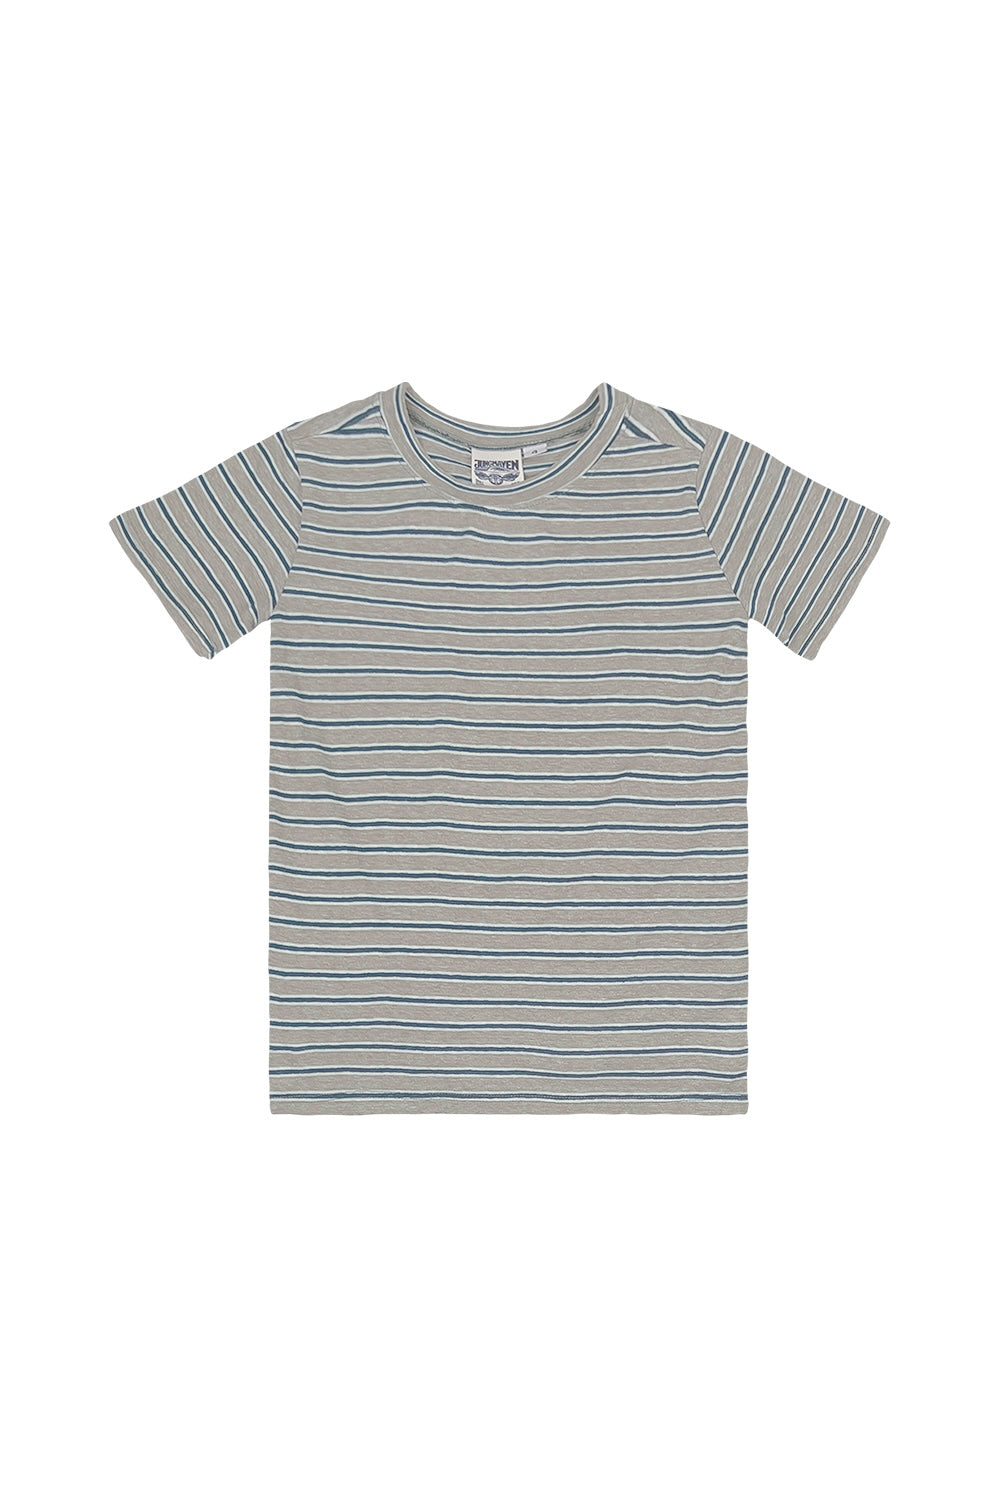 Stripe Grom Tee | Jungmaven Hemp Clothing & Accessories / Color: Teal/White/ Gray Stripe